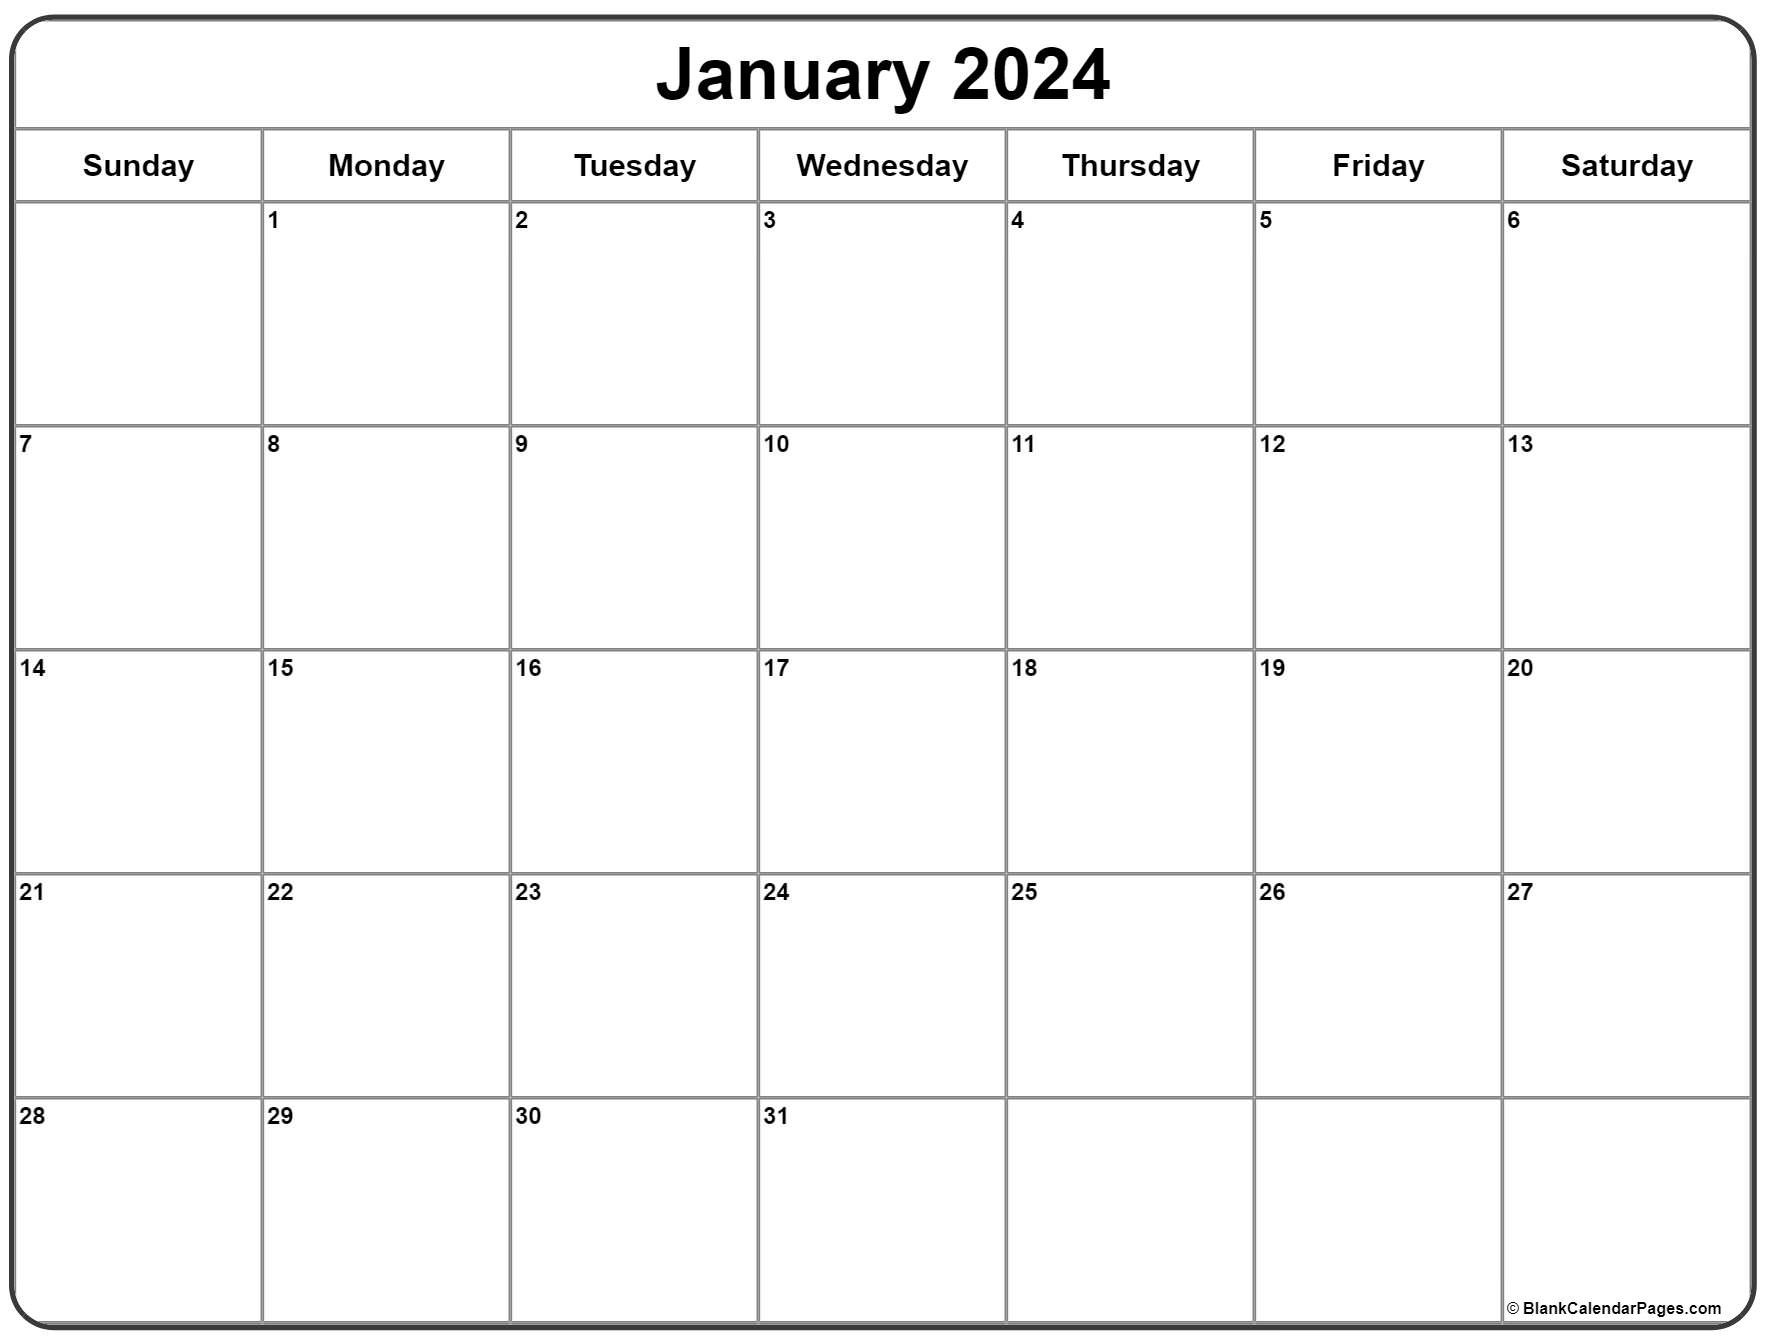 January 2024 Calendar Excel Template Cool Latest Review of January